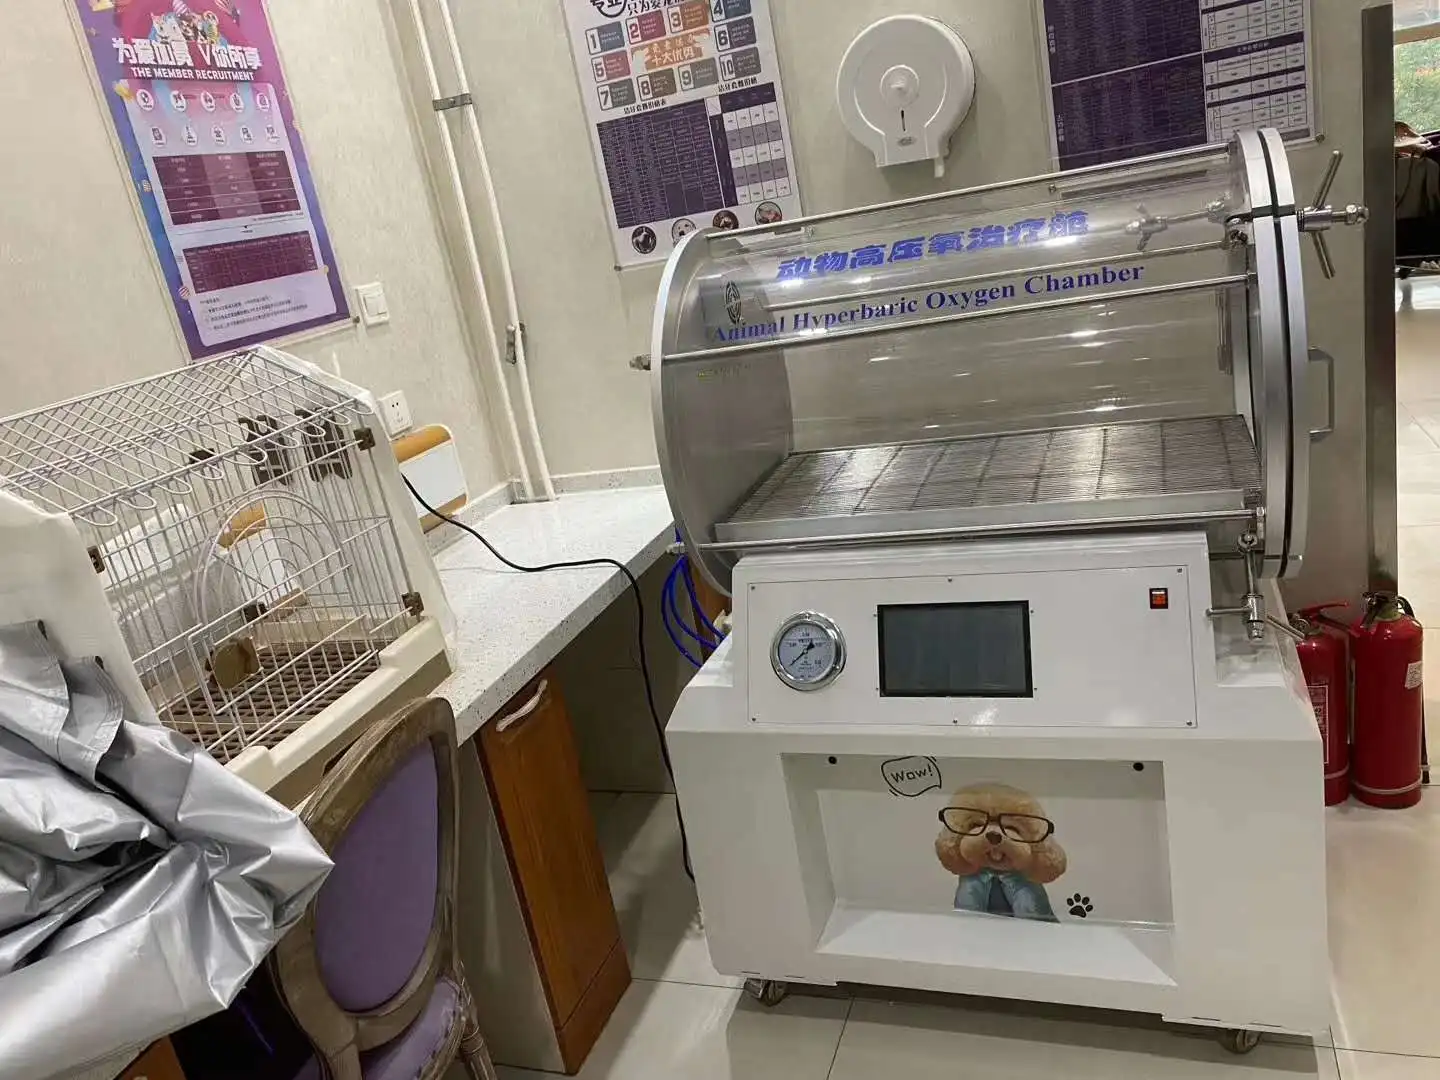 puppy incubator with oxygen